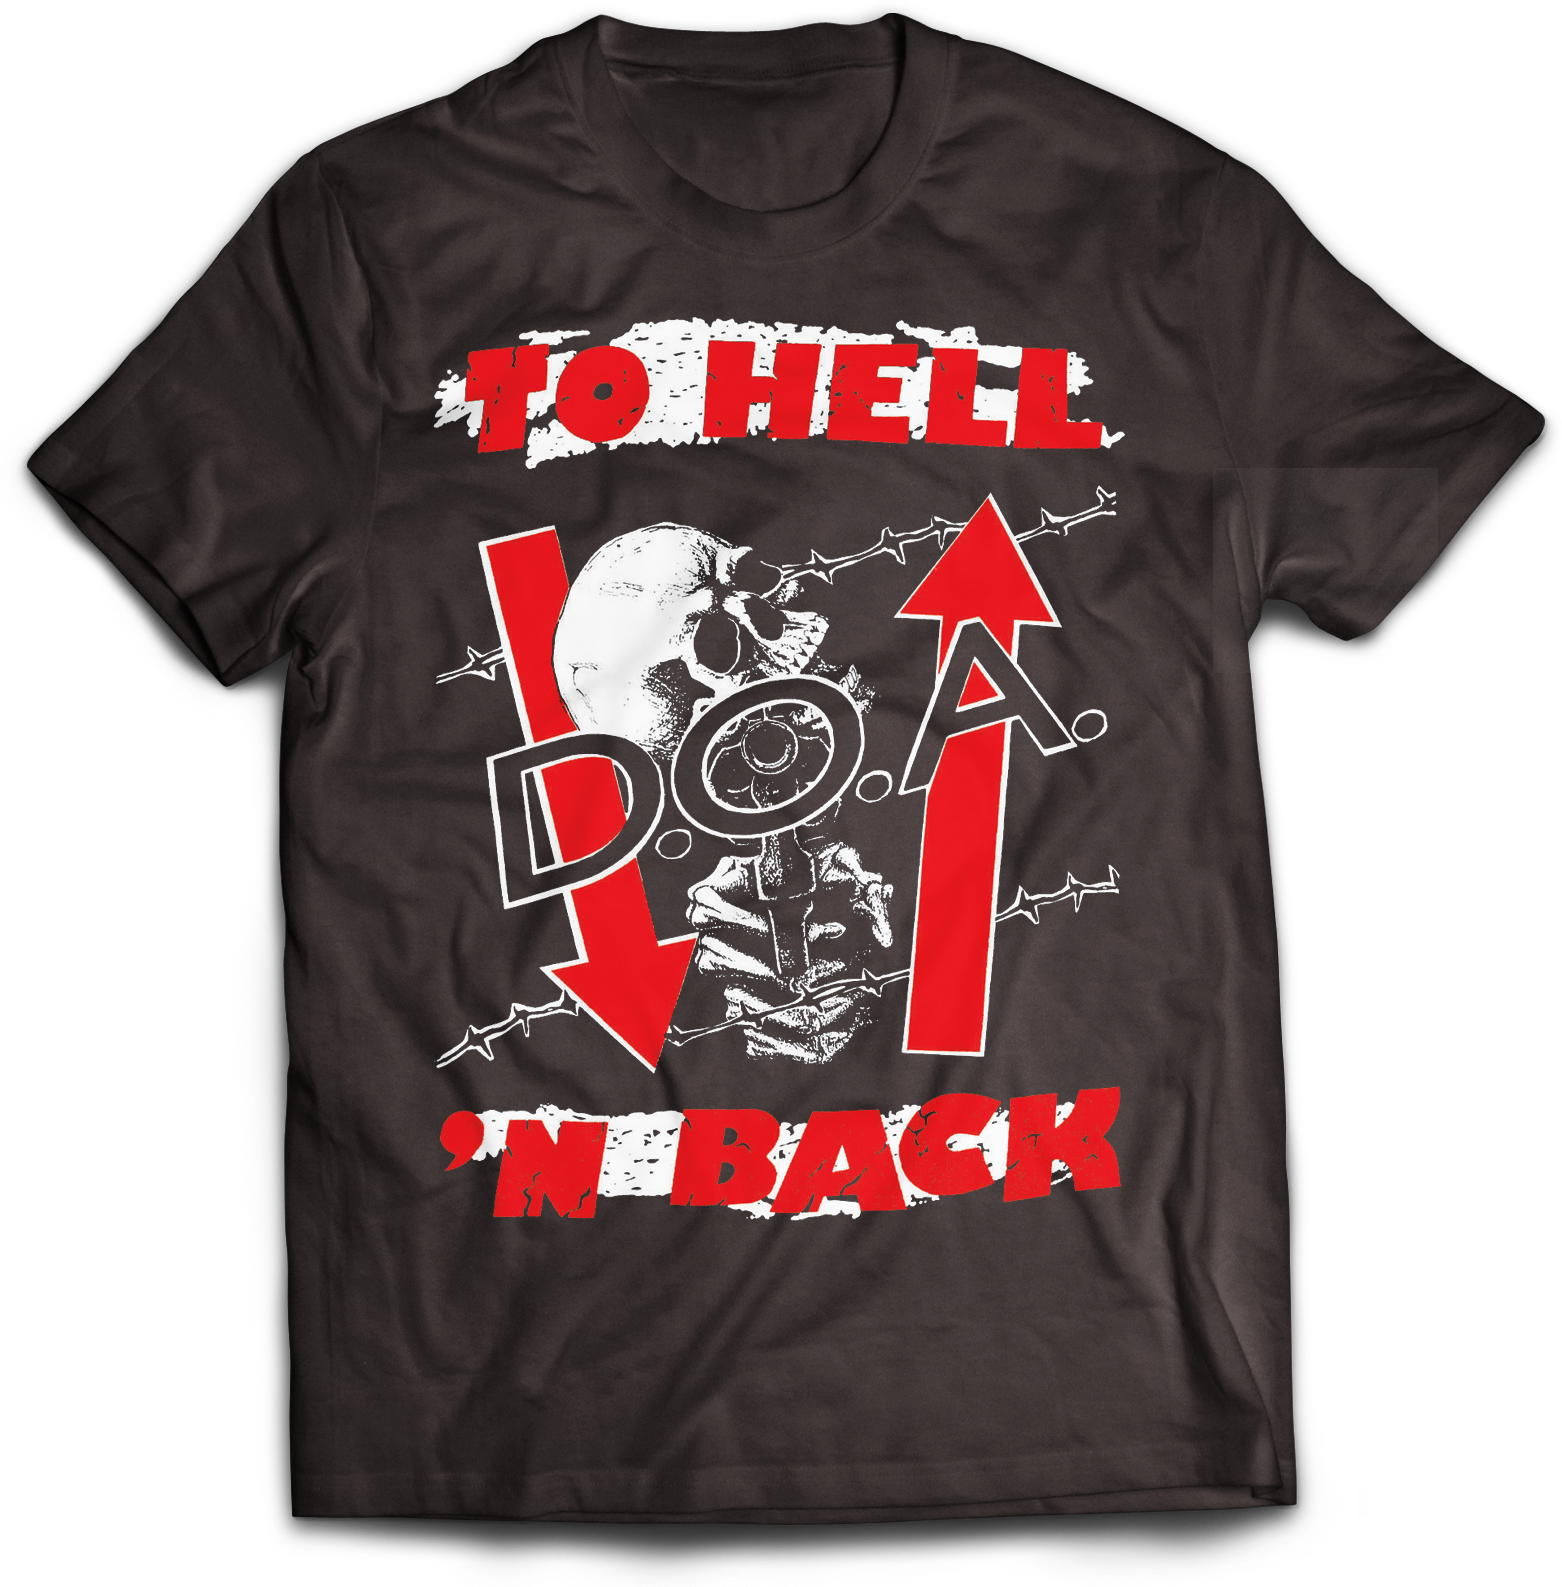 D.O.A. "TO HELL N BACK" T-SHIRT